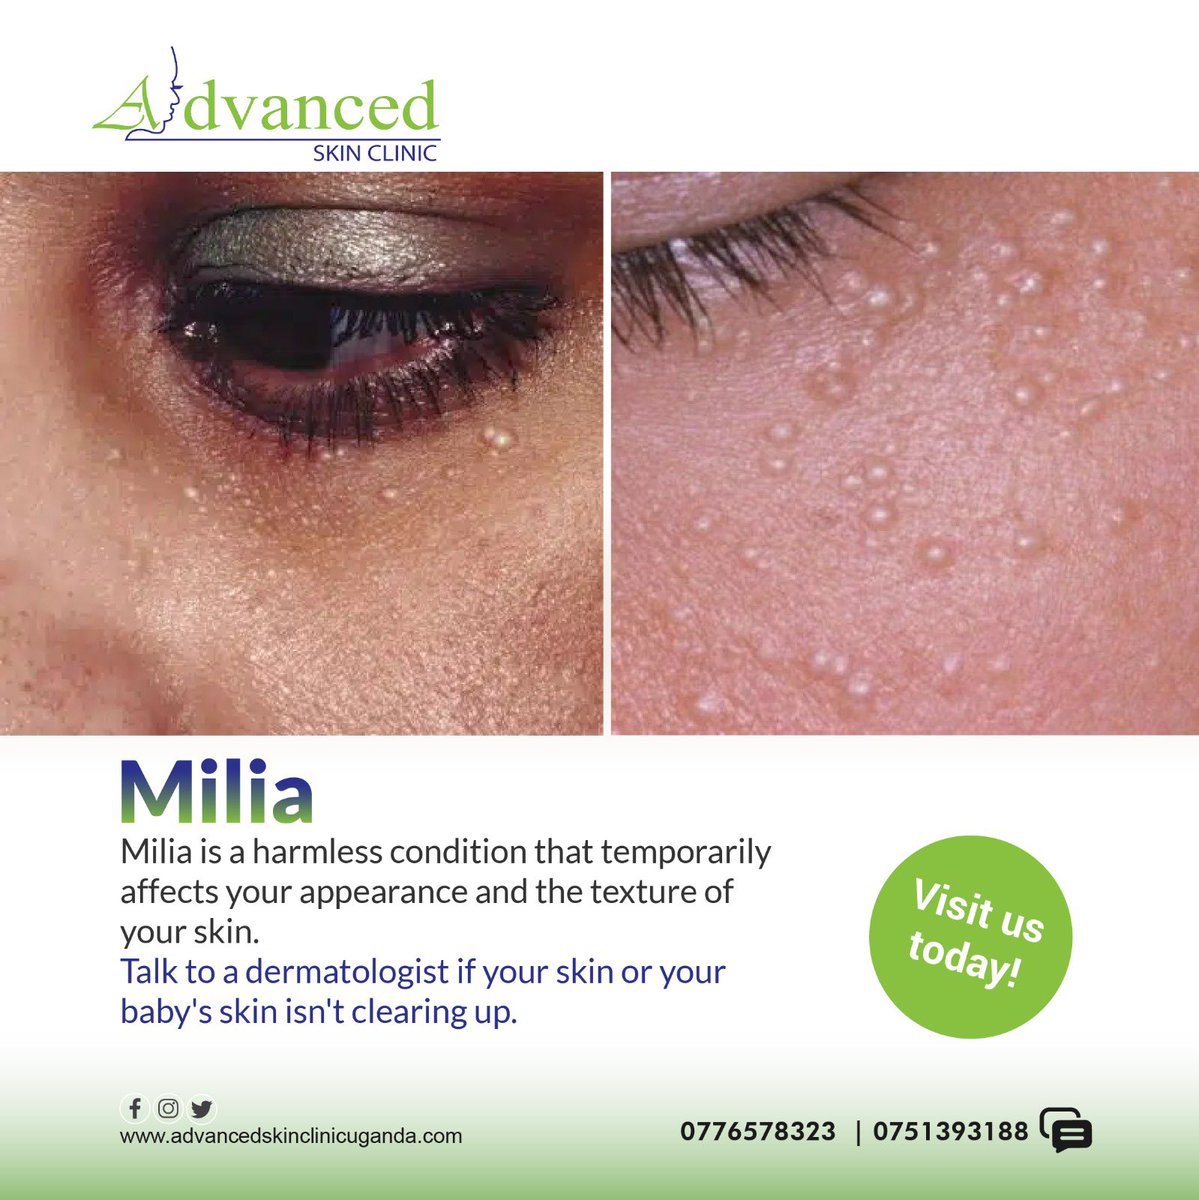 Talk to a dermatologist if your skin or your baby’s skin isn’t clearing up within a few weeks.
#skintreatment #milia